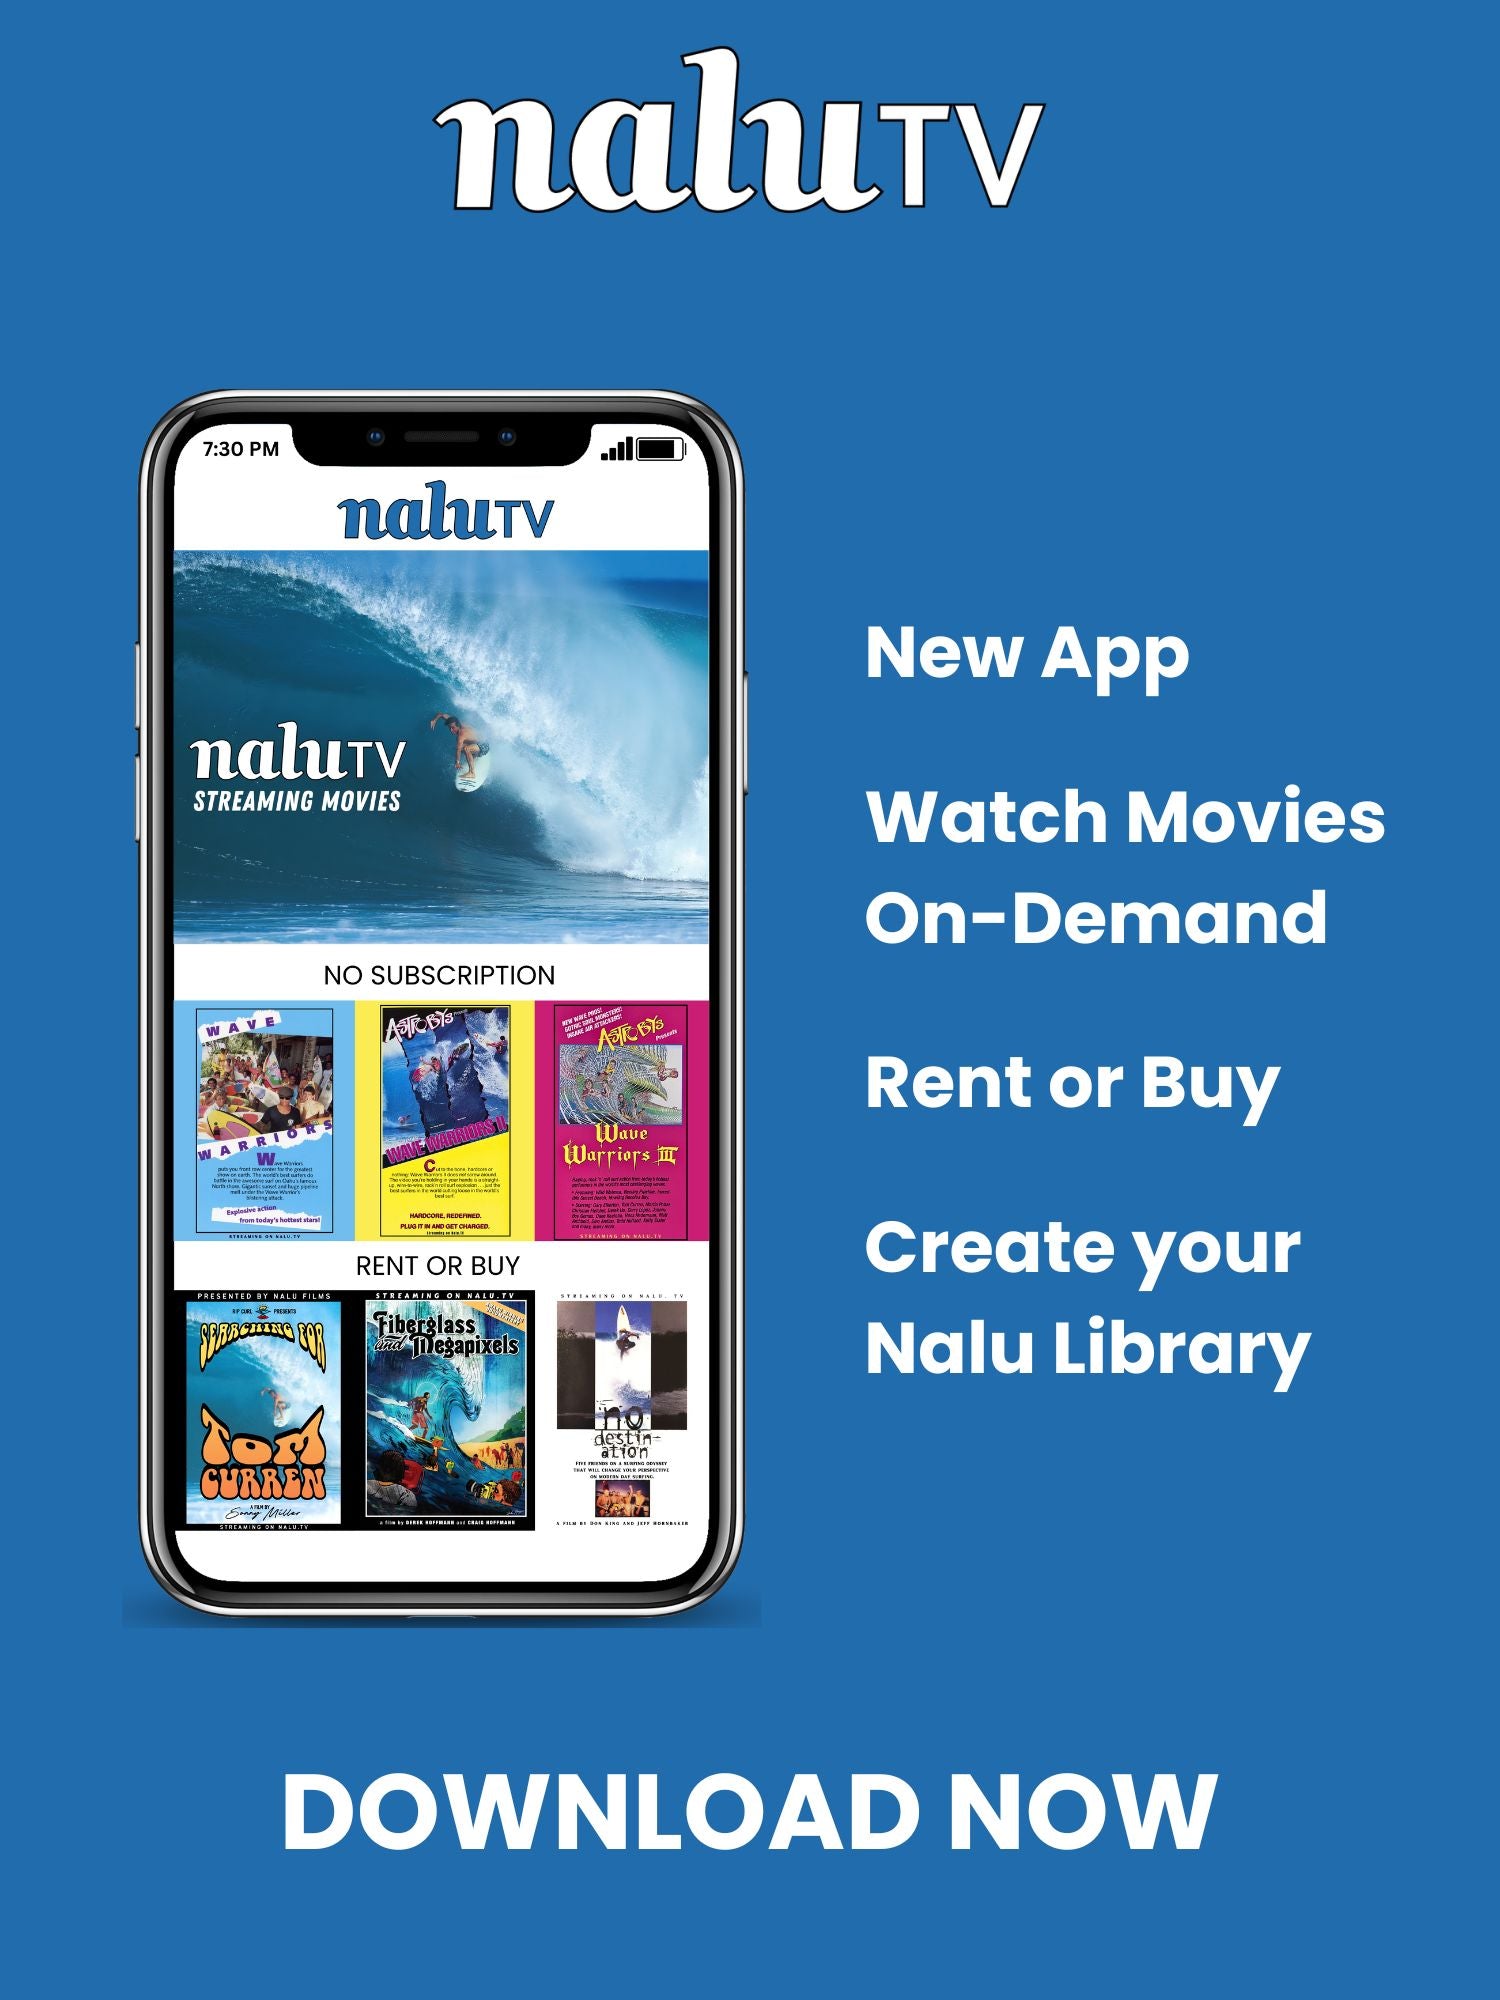 Enjoy Movies on your phone or tablet